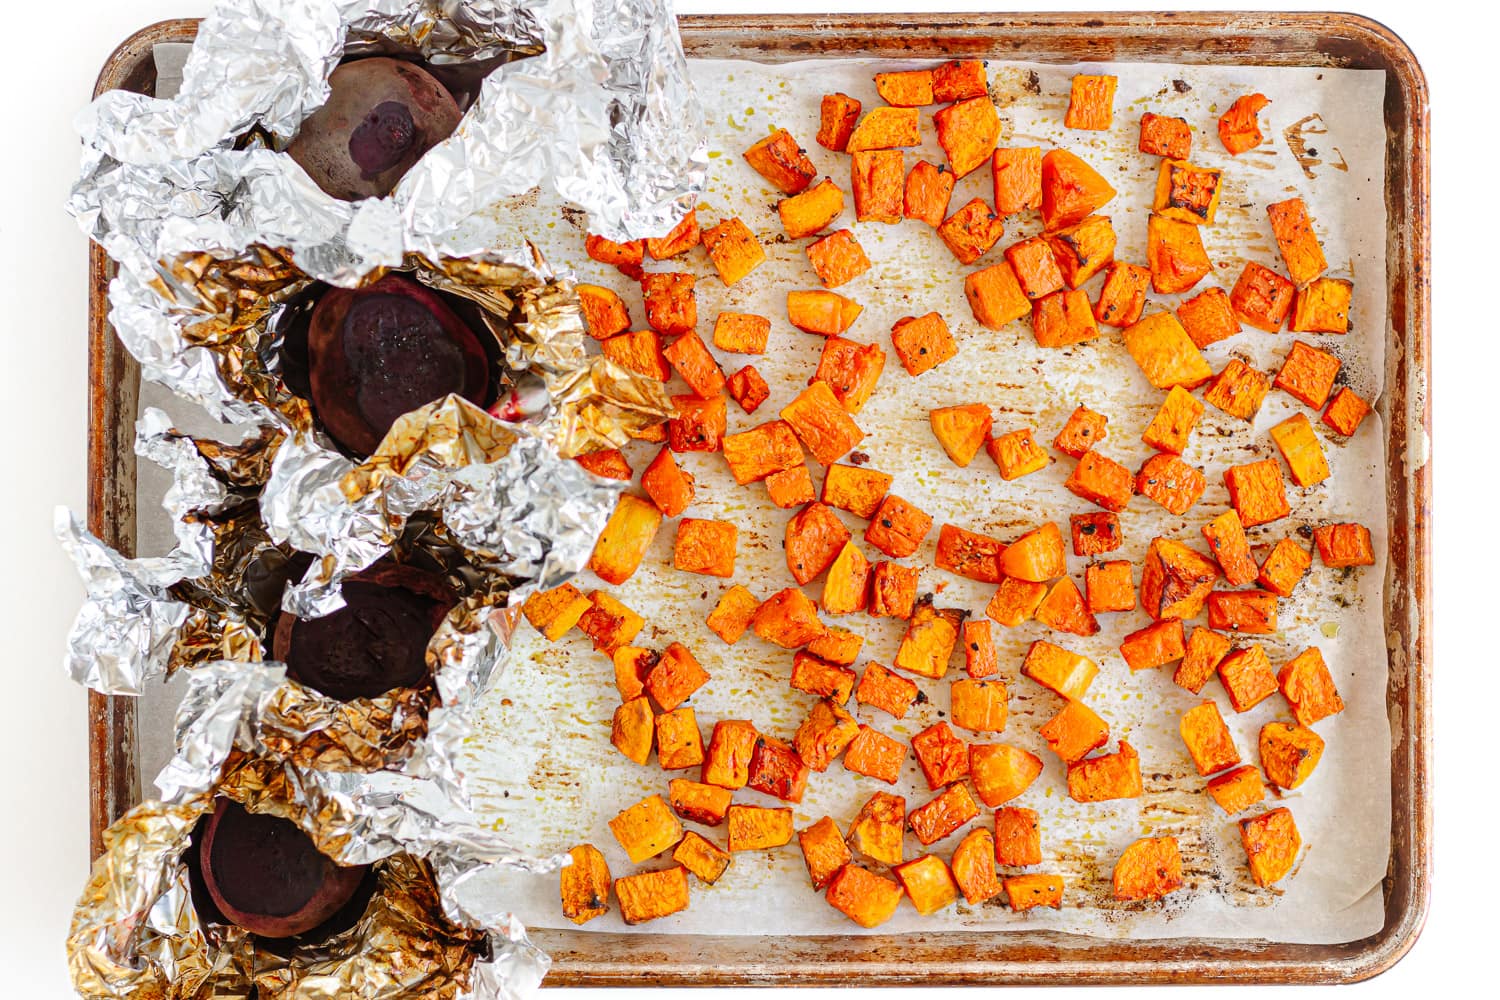 Roasted cubed pumpkin and whole beets on a baking sheet.